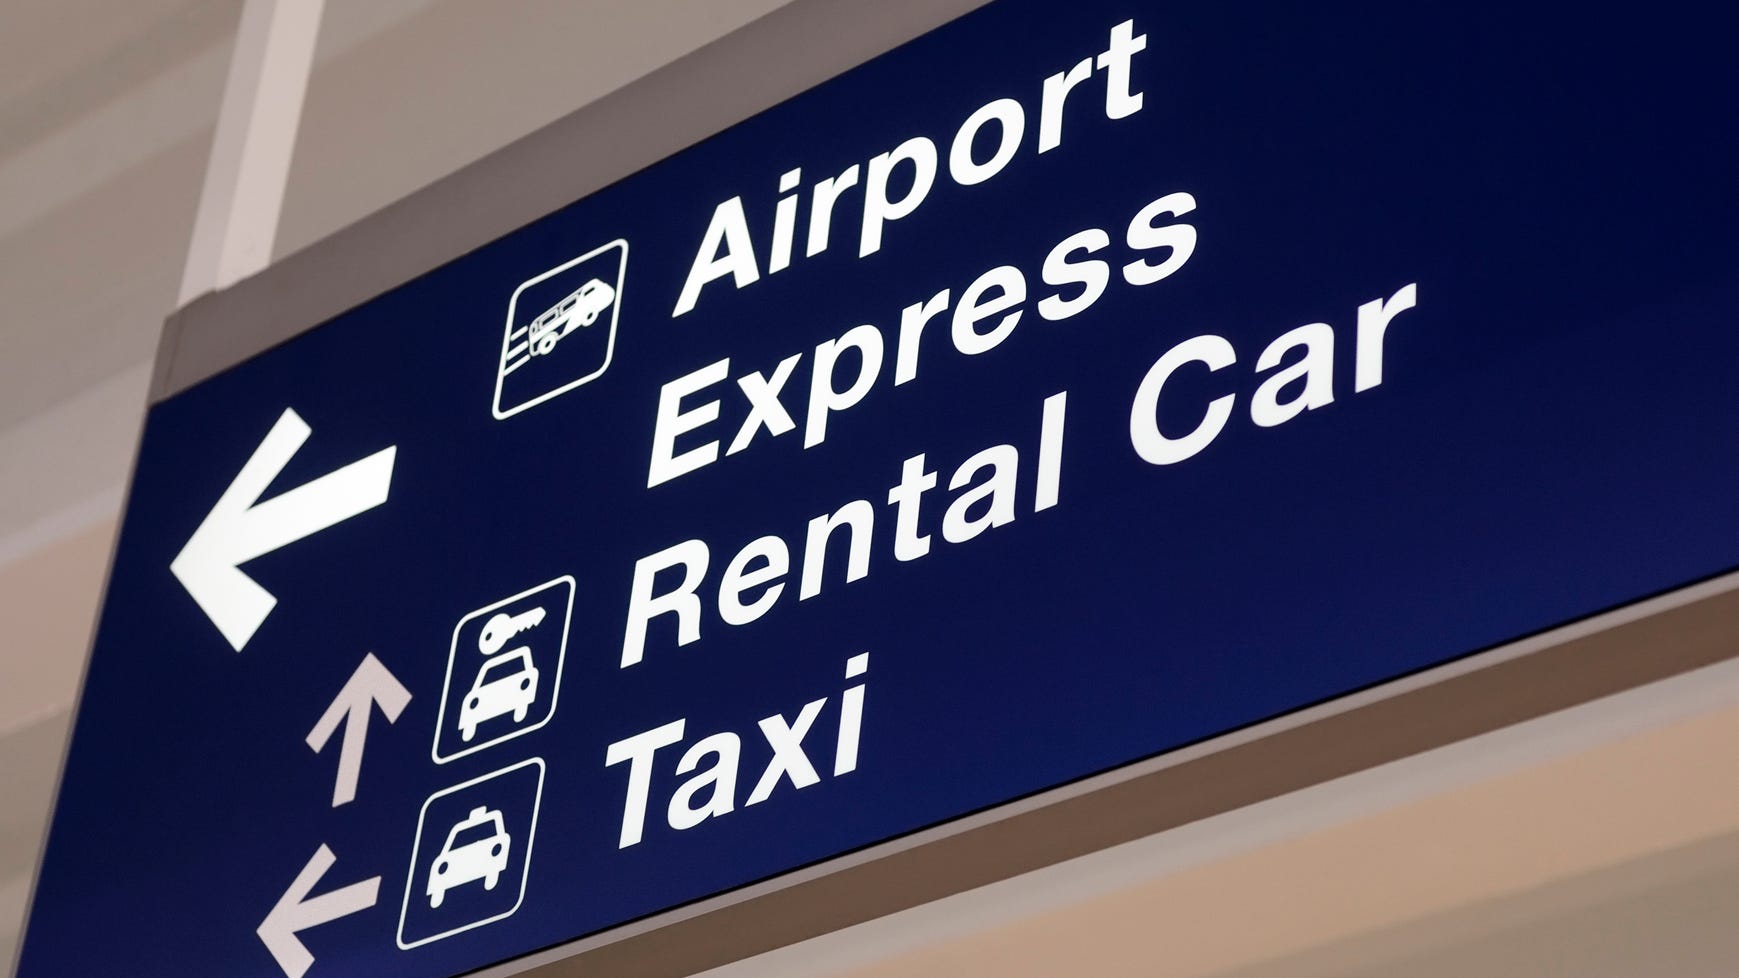 Airport car rental: Book early due to shortage, COVID travel surge